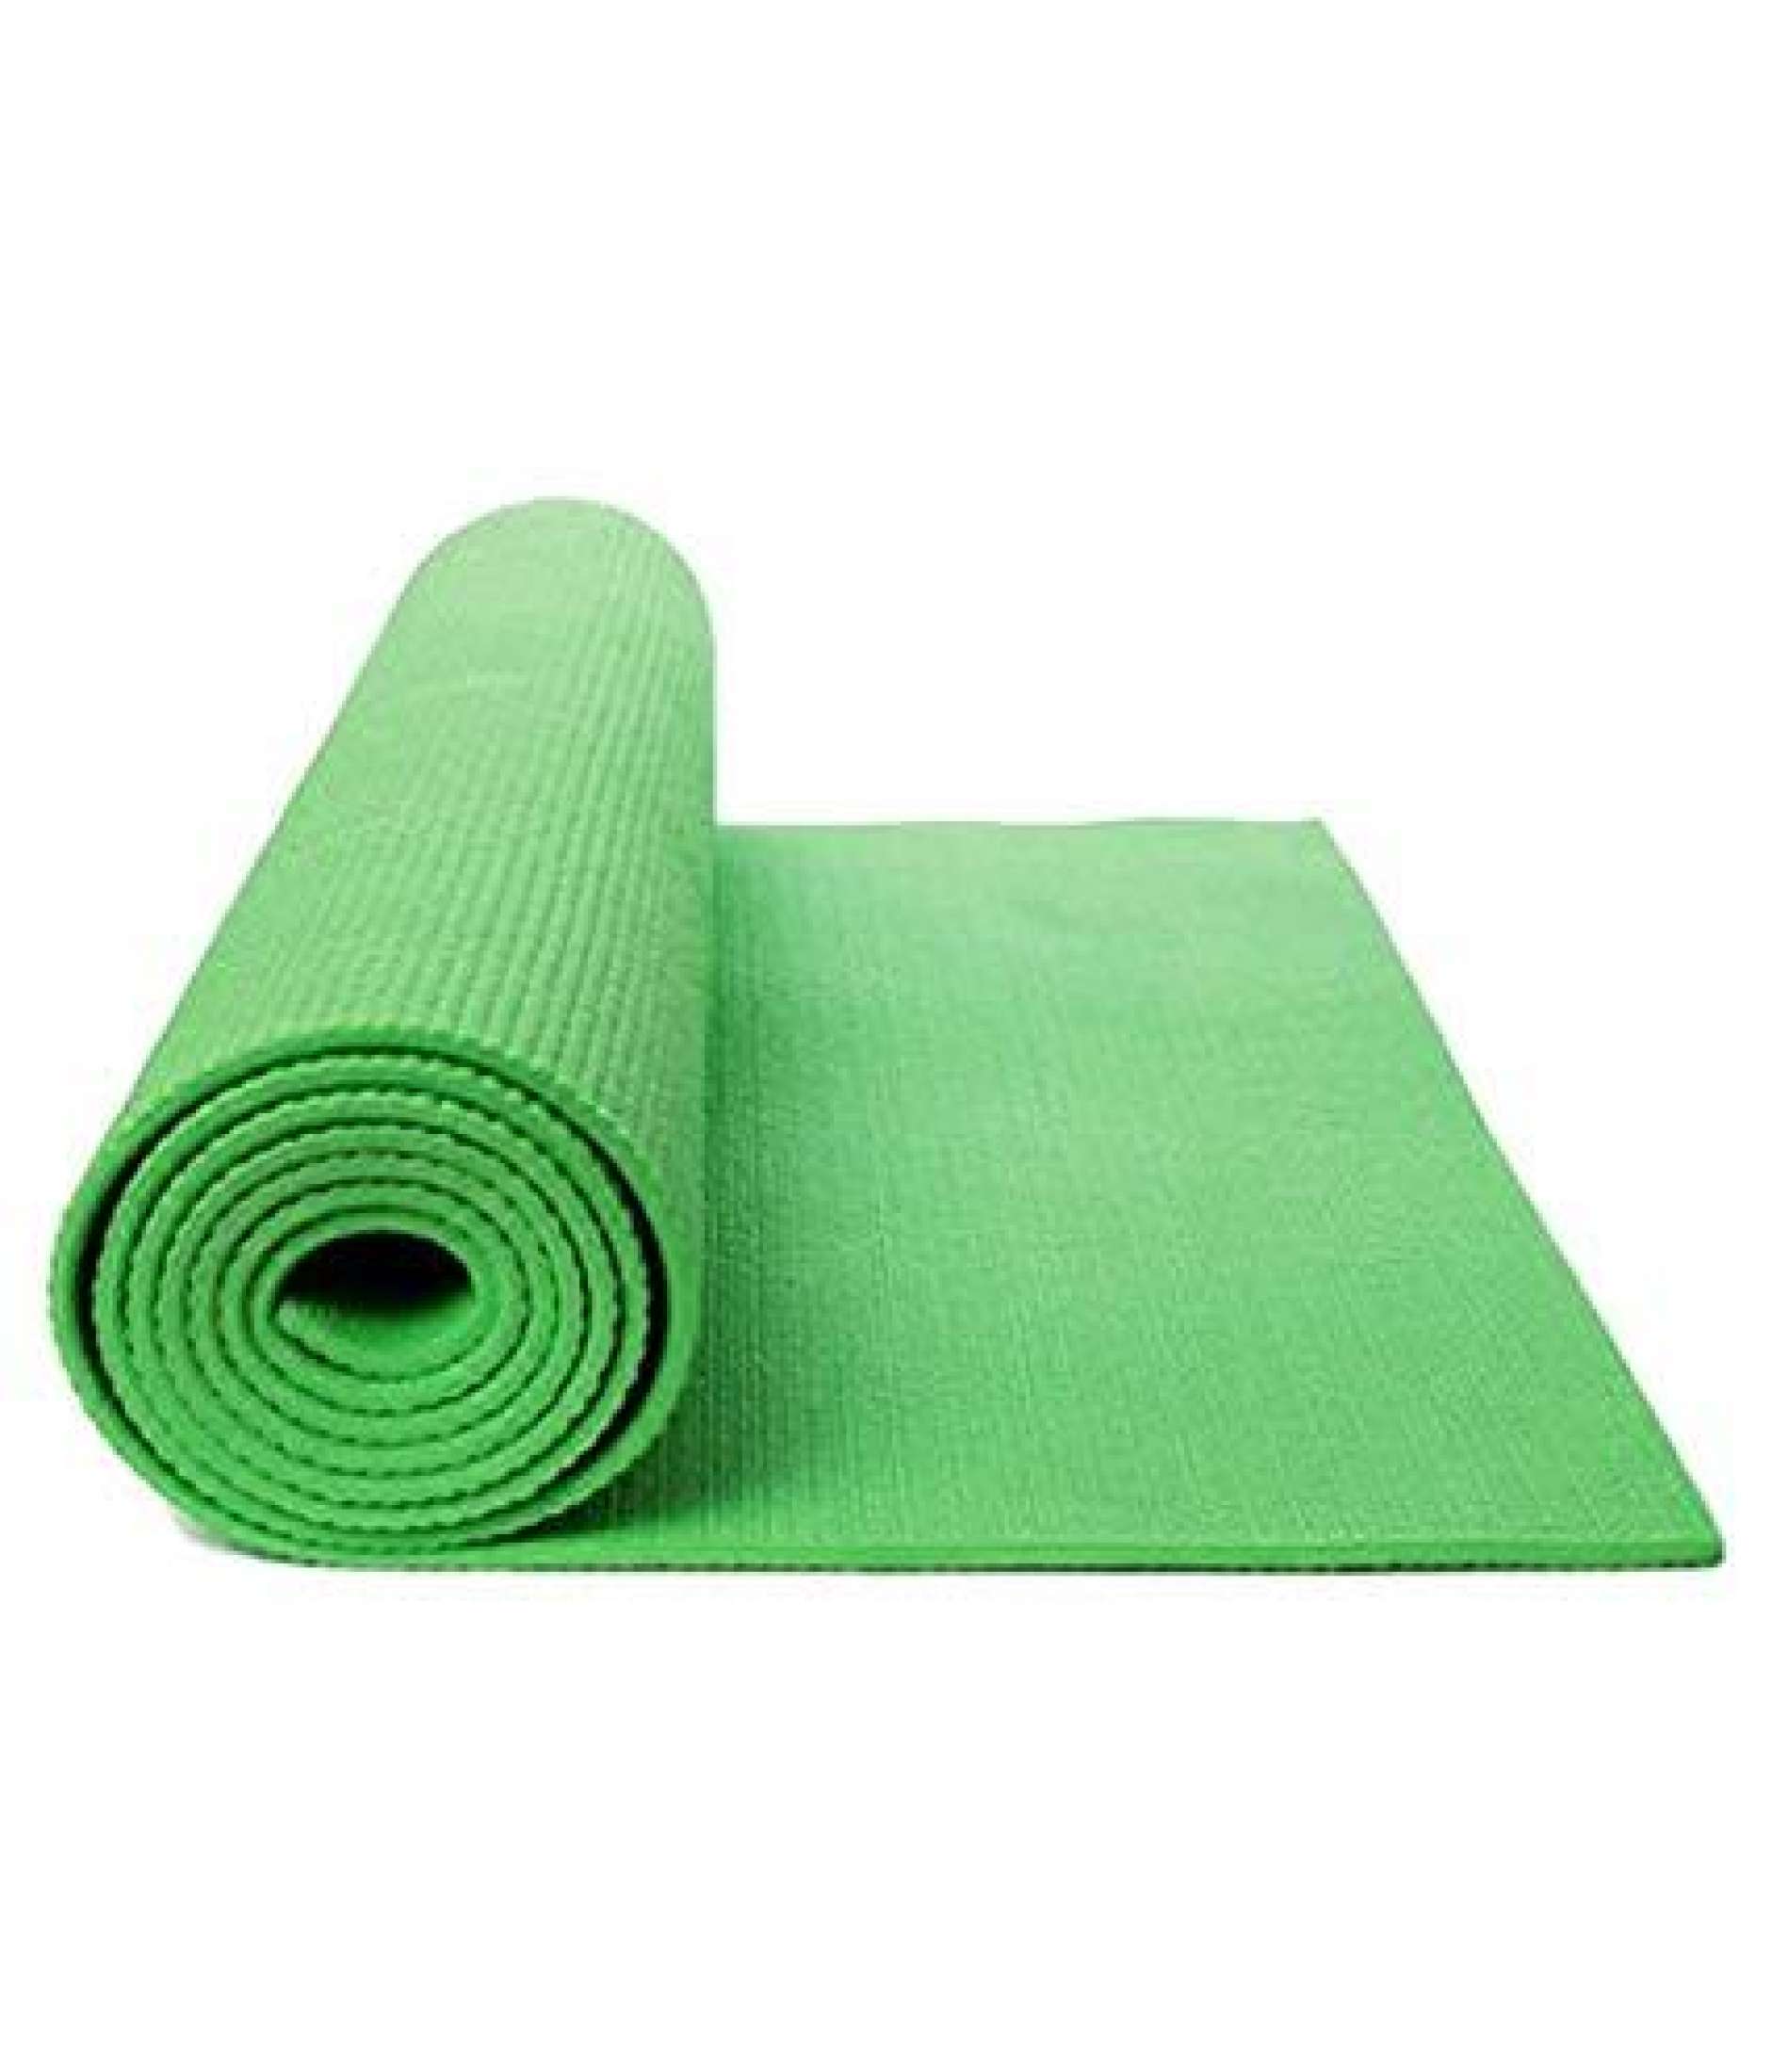 Yoga Mat Mm Online Home Shopping In Pakistan Best Deals Fast Delivery